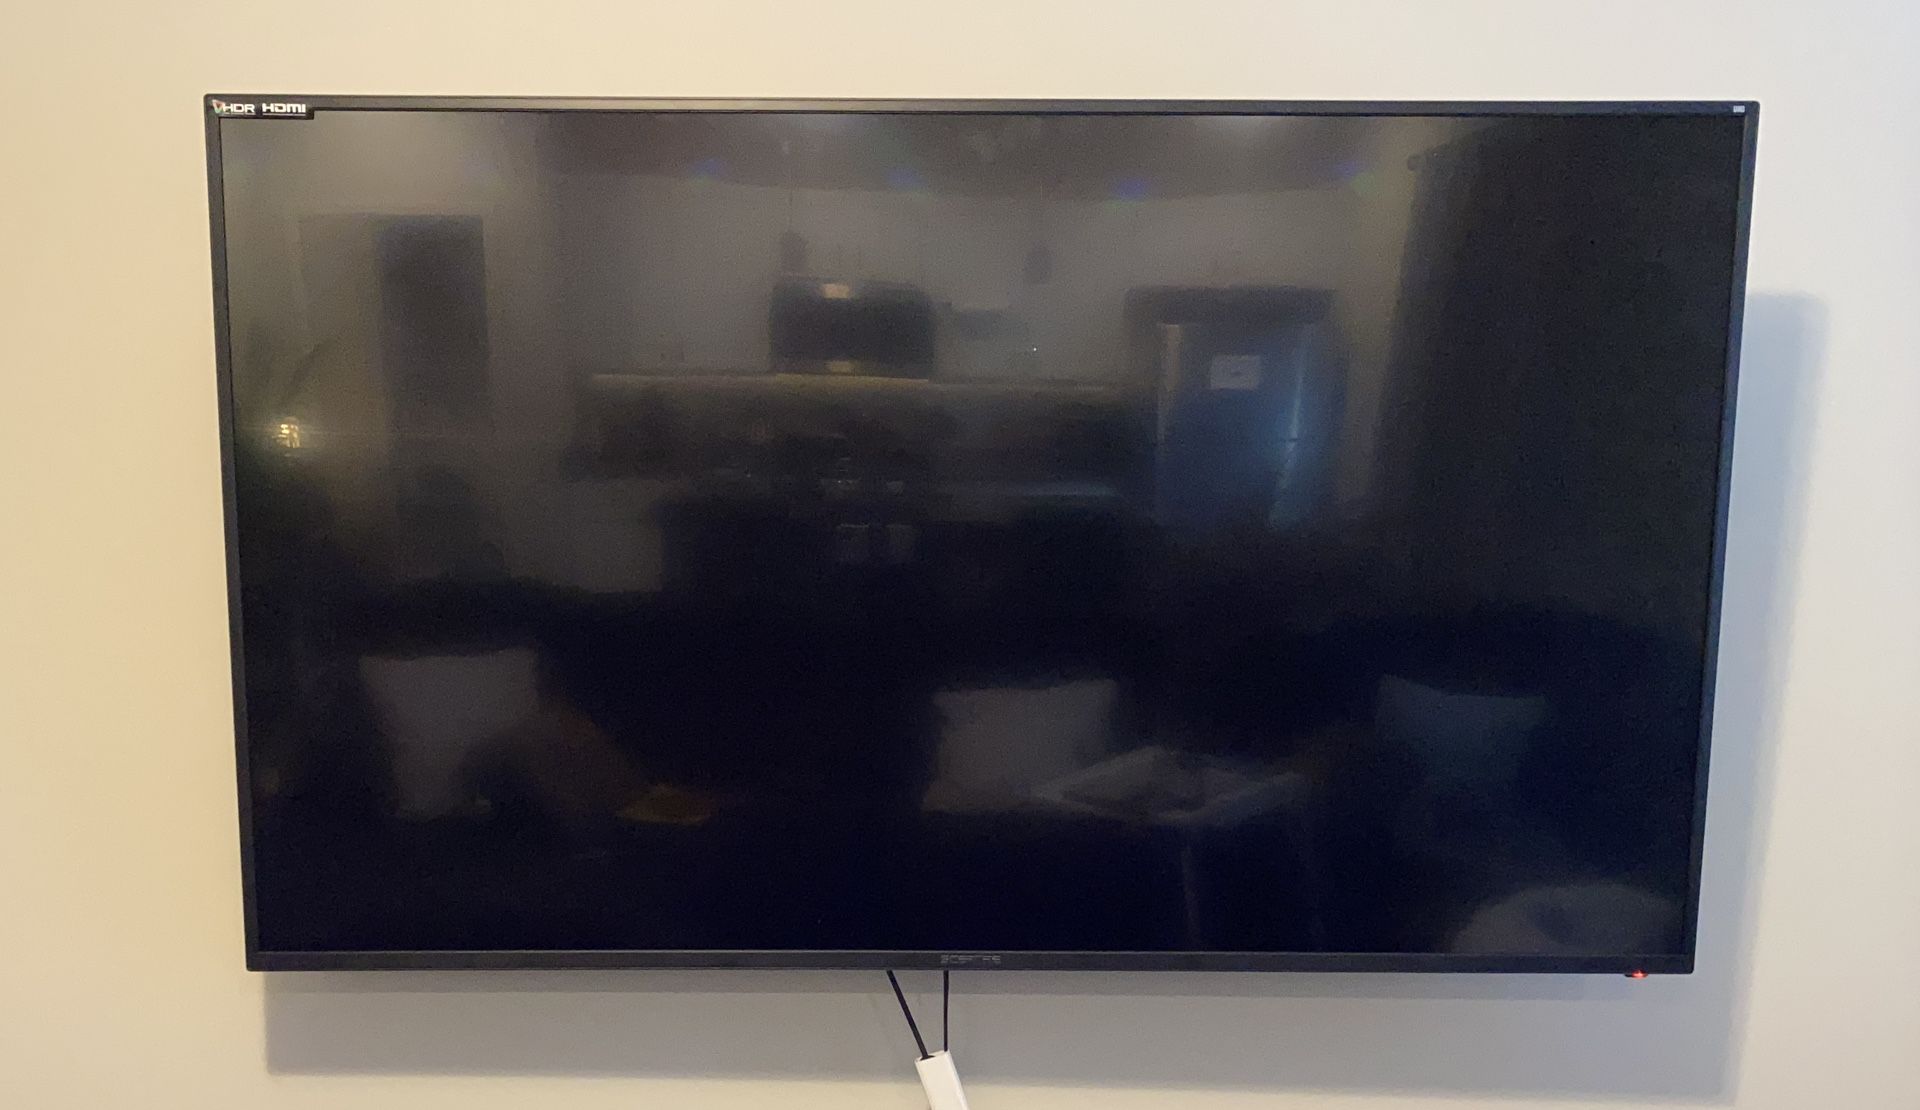 65 inch 4k LED TV w/ wall mount included